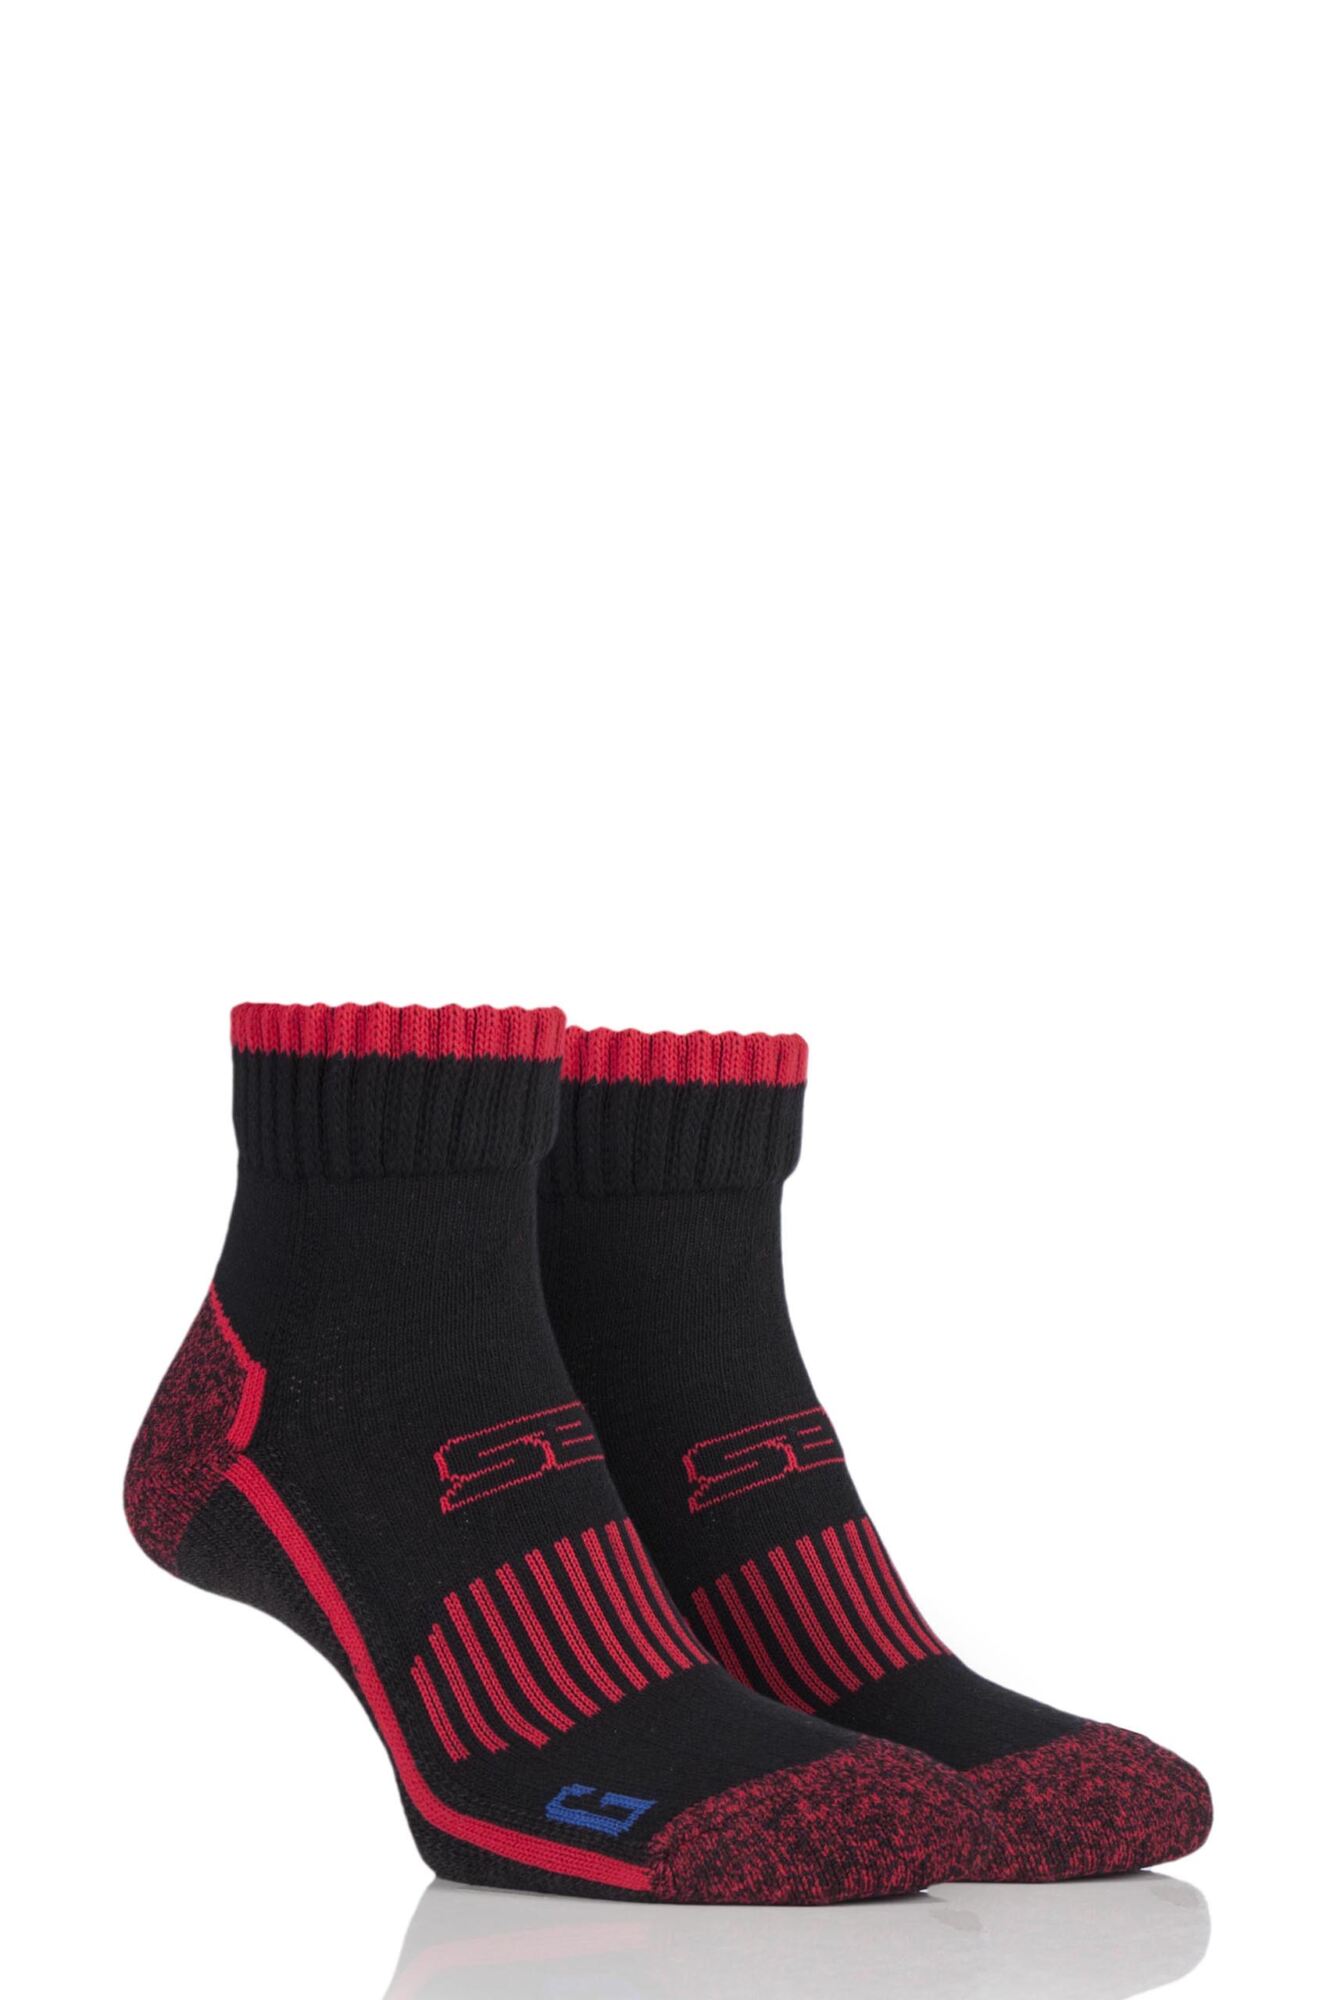 2 Pair with BlueGuard Ankle High Walking Socks Men's - Storm Bloc